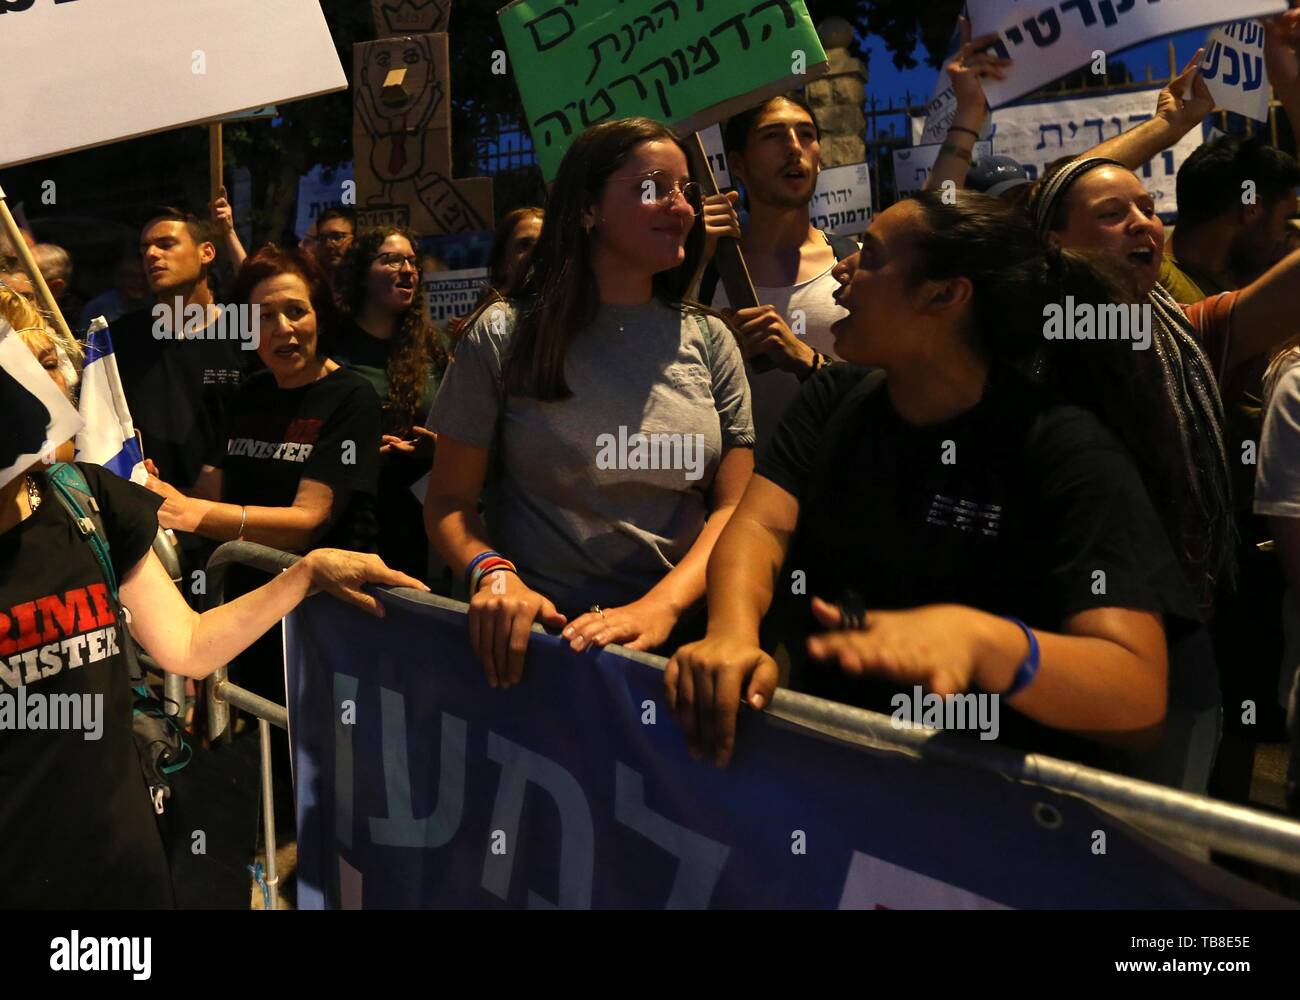 Jerusalem. 30th May, 2019. People chant slogans and hold placards as they take part in a protest against Israeli Prime Minister Benjamin Netanyahu in Jerusalem, on May 30, 2019. Credit: Muammar Awad/Xinhua/Alamy Live News Stock Photo